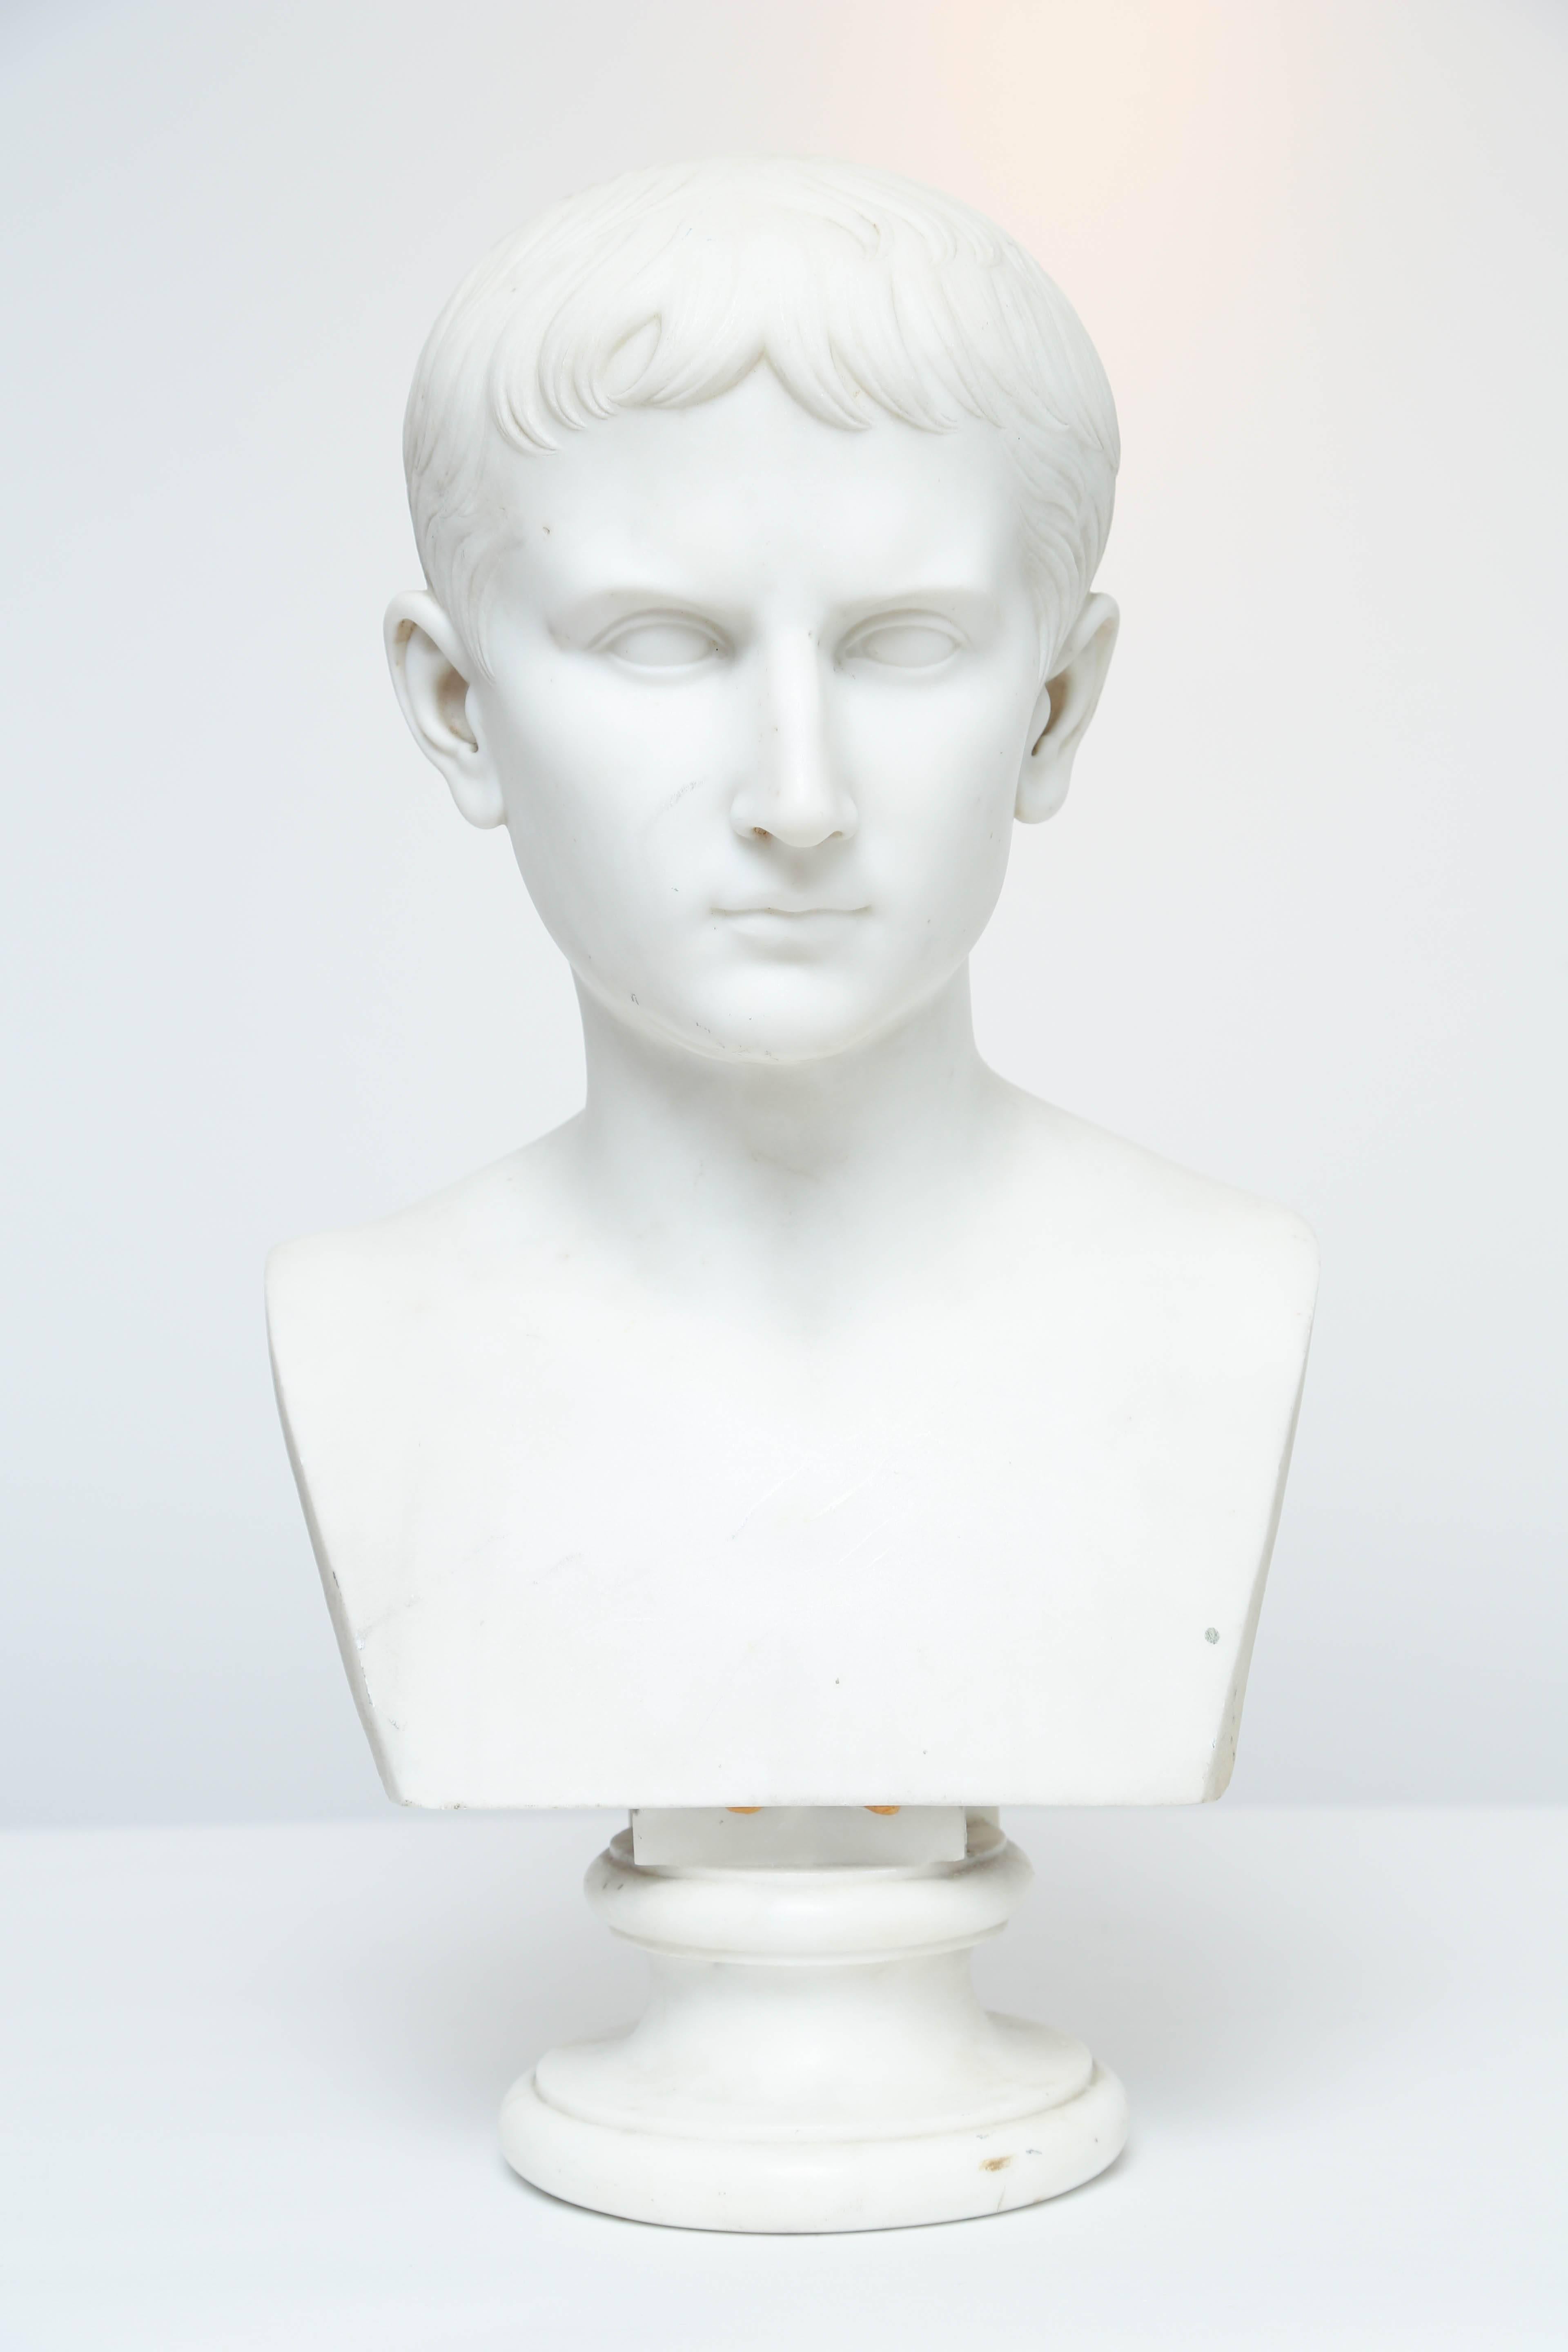 19th century portrait bust of Augustus Caesar, heir to Julius Caesar, depicted as a boy while he was named Octavian before becoming emperor in 27 BC. He was 19 at the time of the murder of Julius Caesar and was part of the Second Triumvirate which